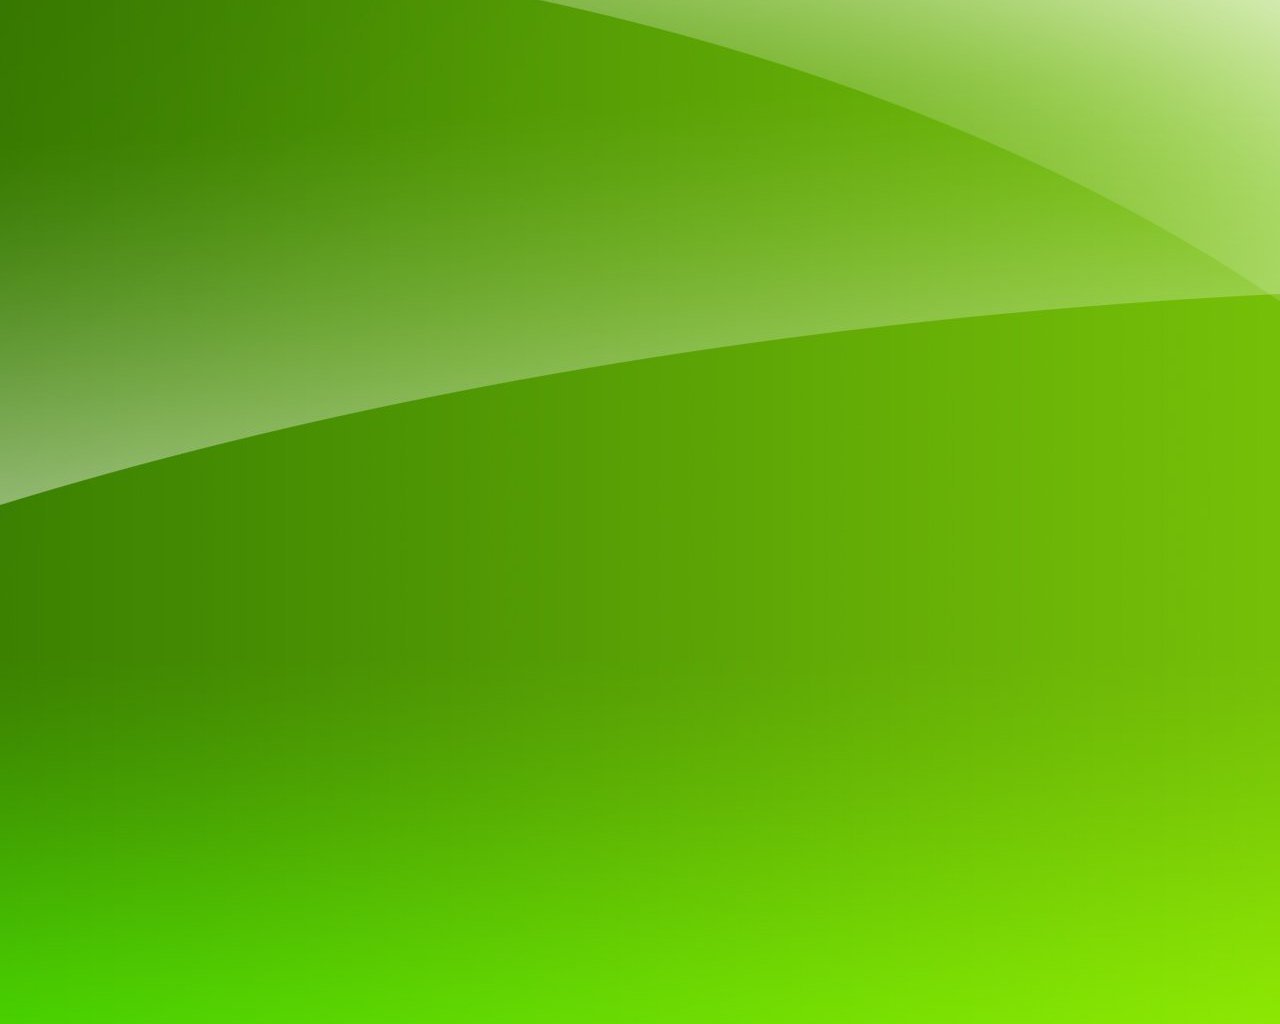 Simple Green - Green Background - 1280x1024 Wallpaper 